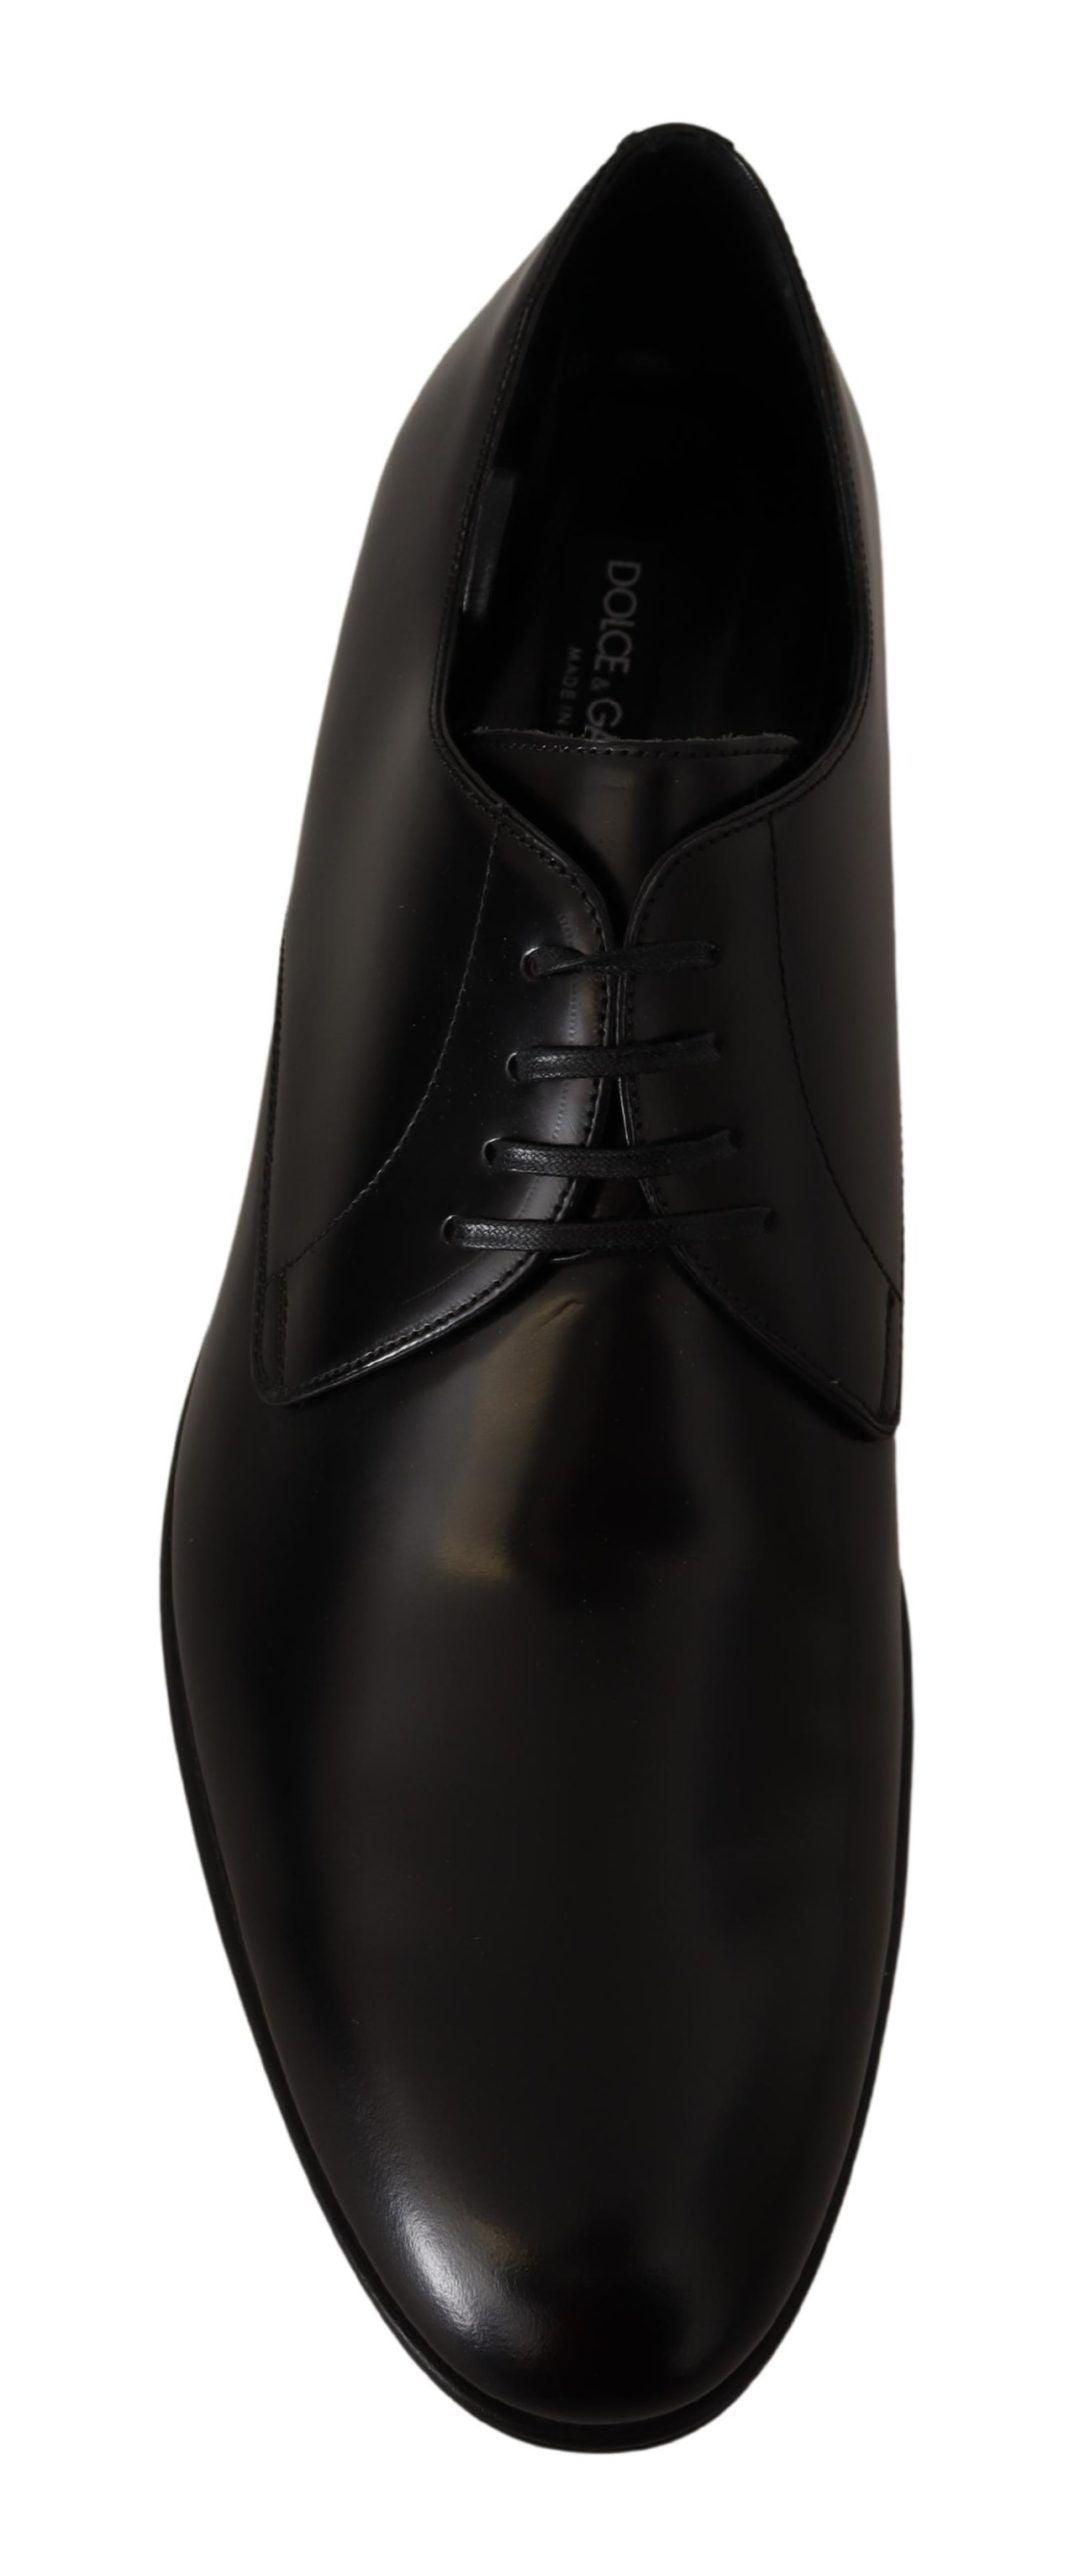 Black Leather Lace Up Formal Derby Shoes - Designed by Dolce & Gabbana Available to Buy at a Discounted Price on Moon Behind The Hill Online Designer Discount Store